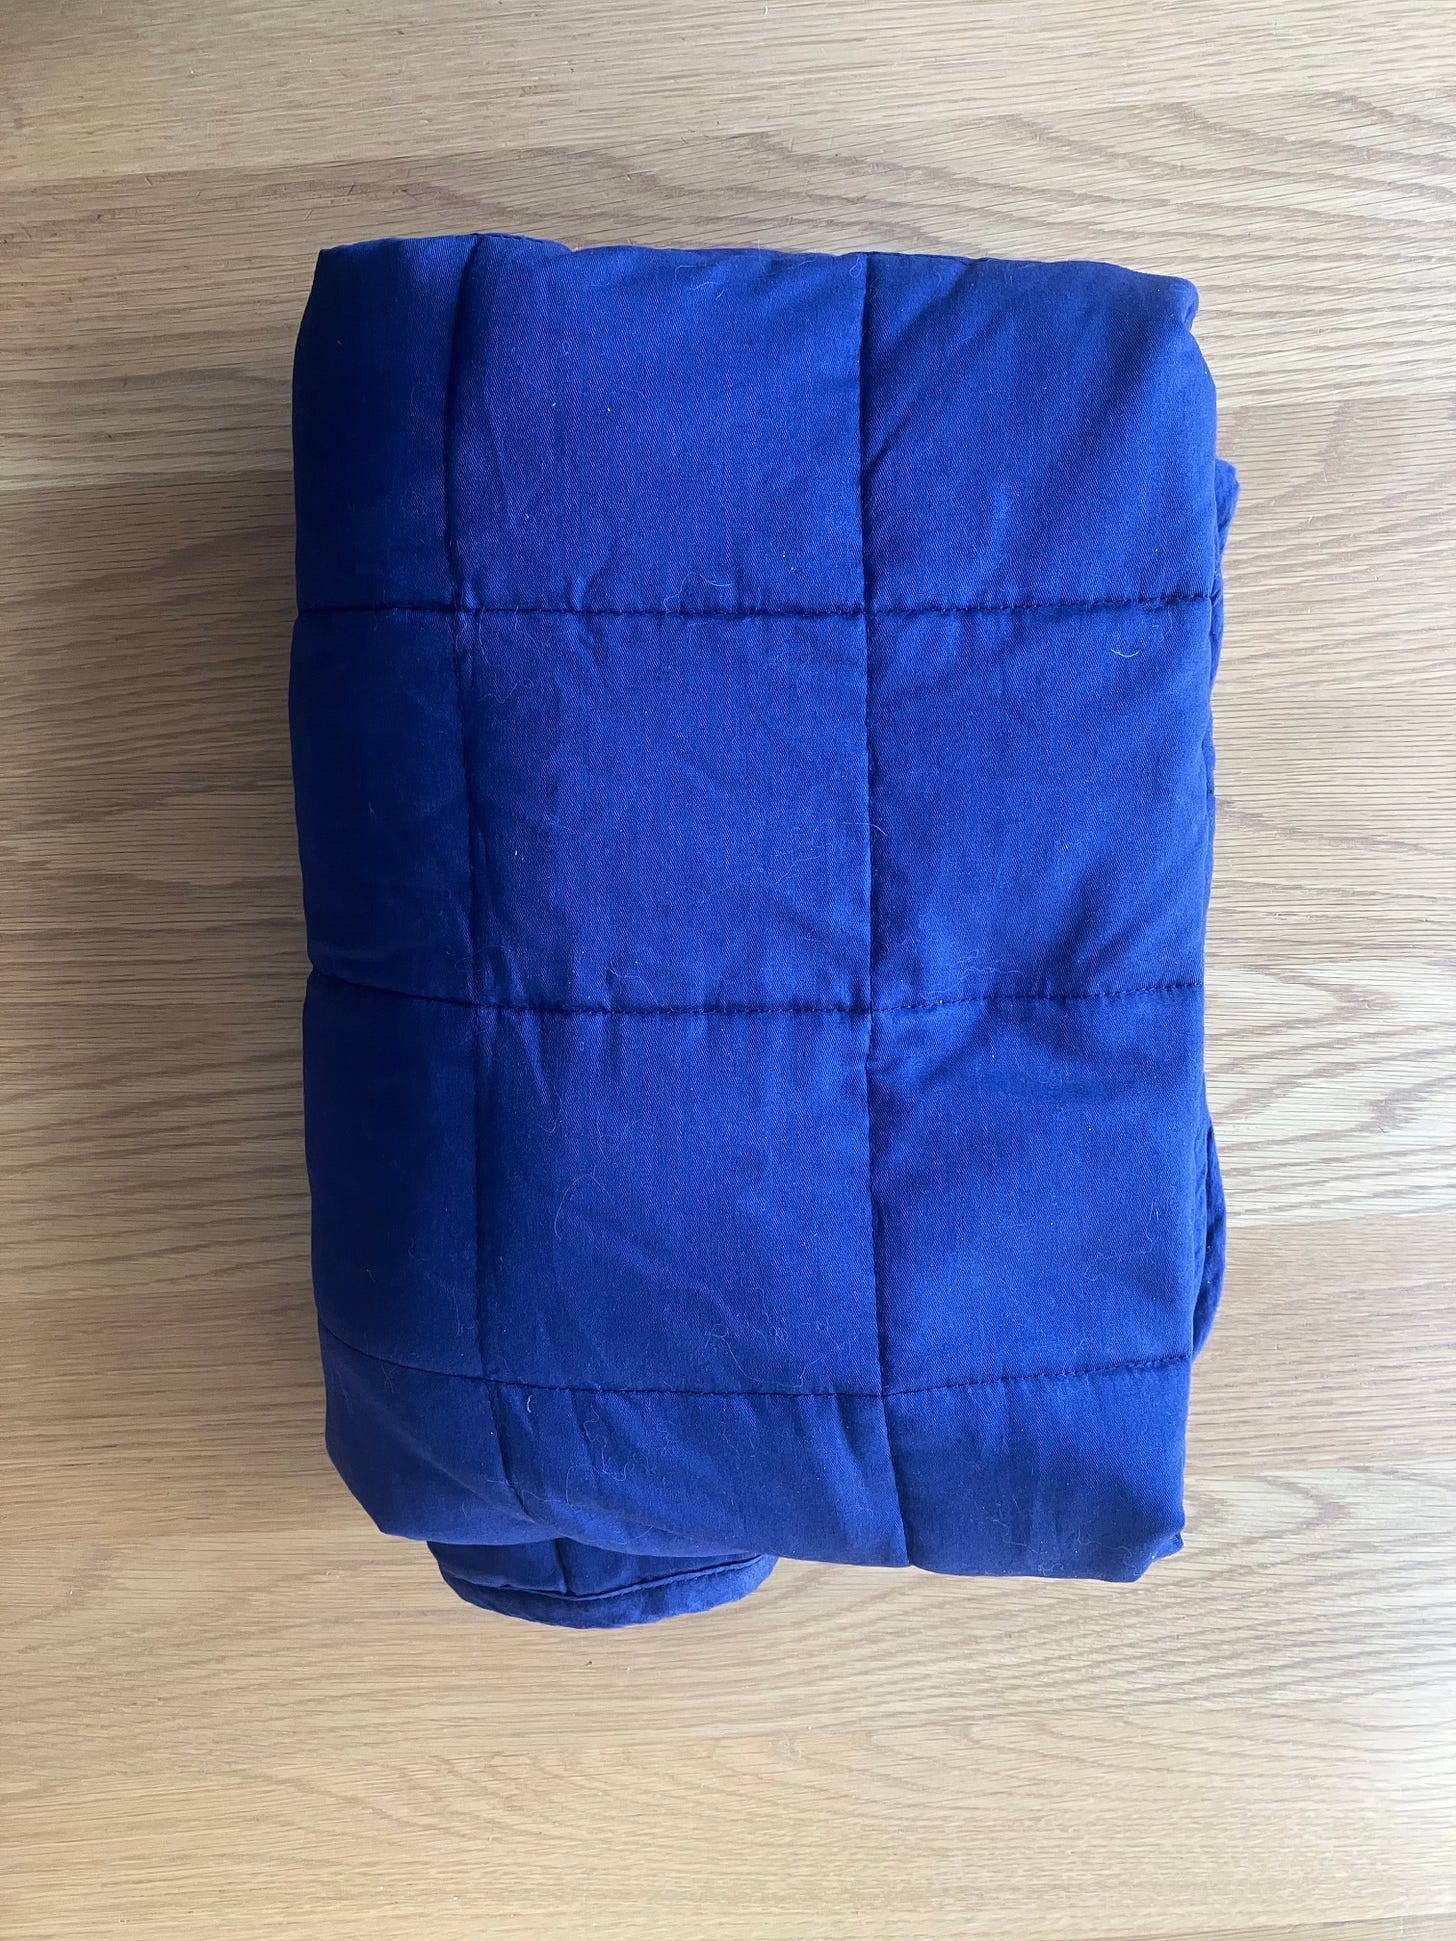 Blue folded blanket on a wood table.